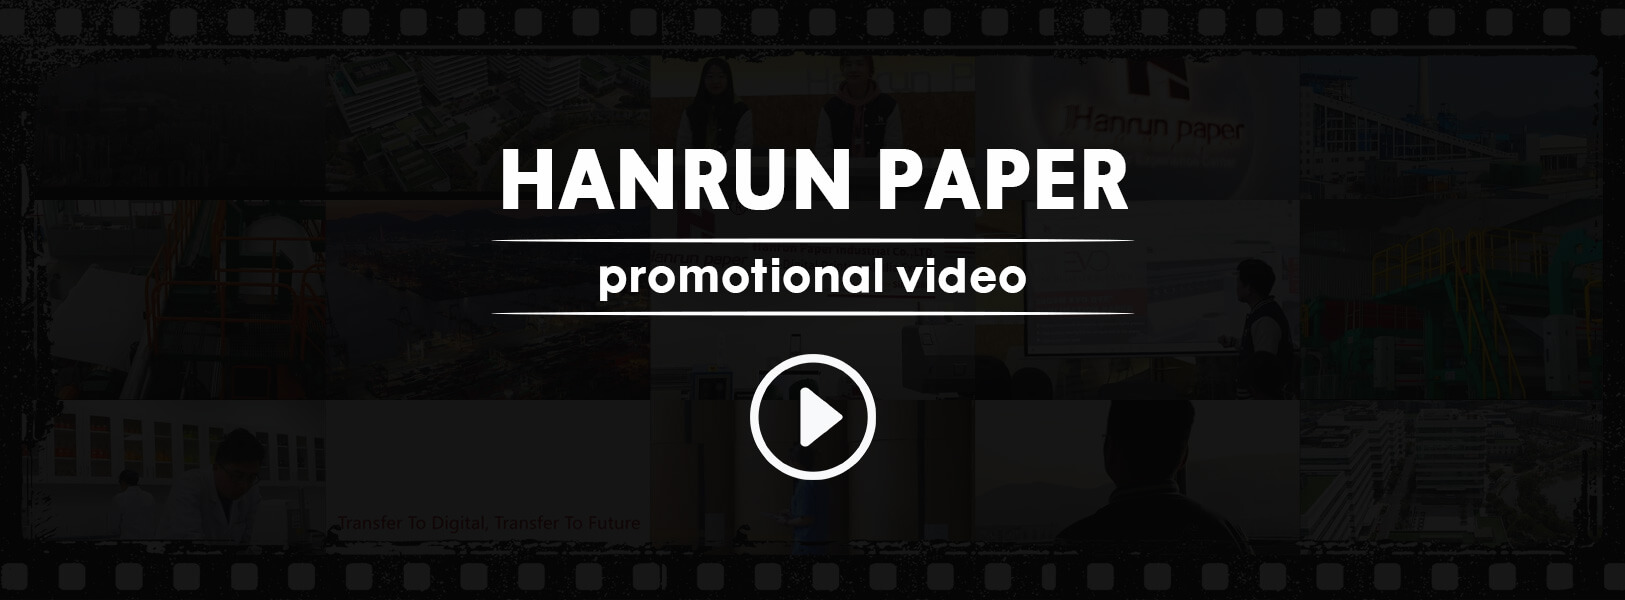 hanrun paper about us